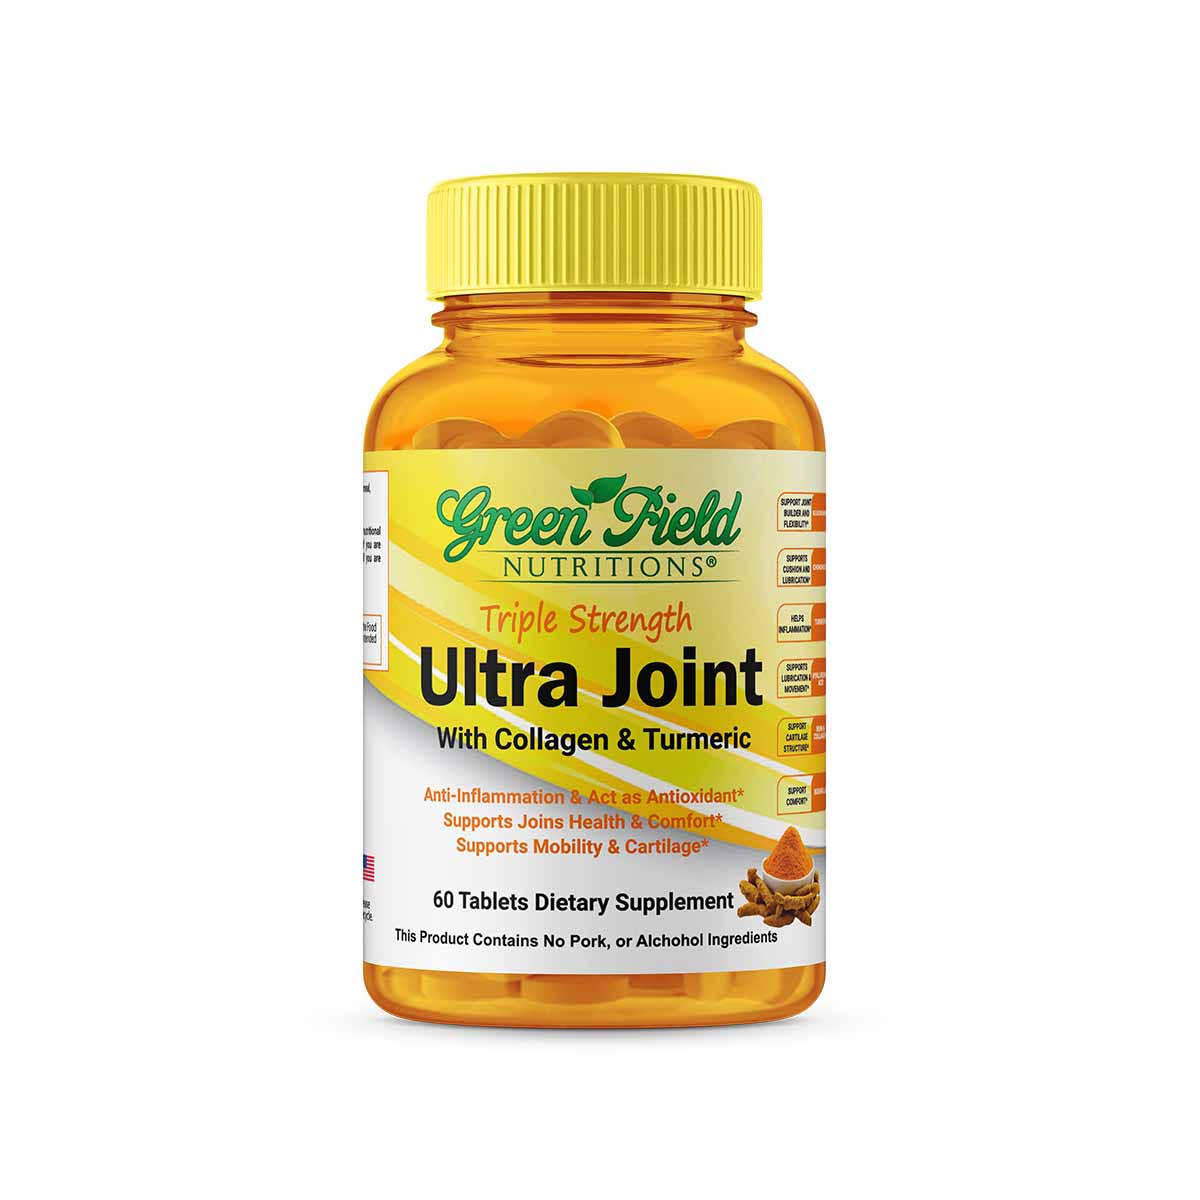 Greenfield Nutritions, Halal Joint Formula - Glucosamine MSM with Turmeric for Joint Support from Greenfield Nutritions